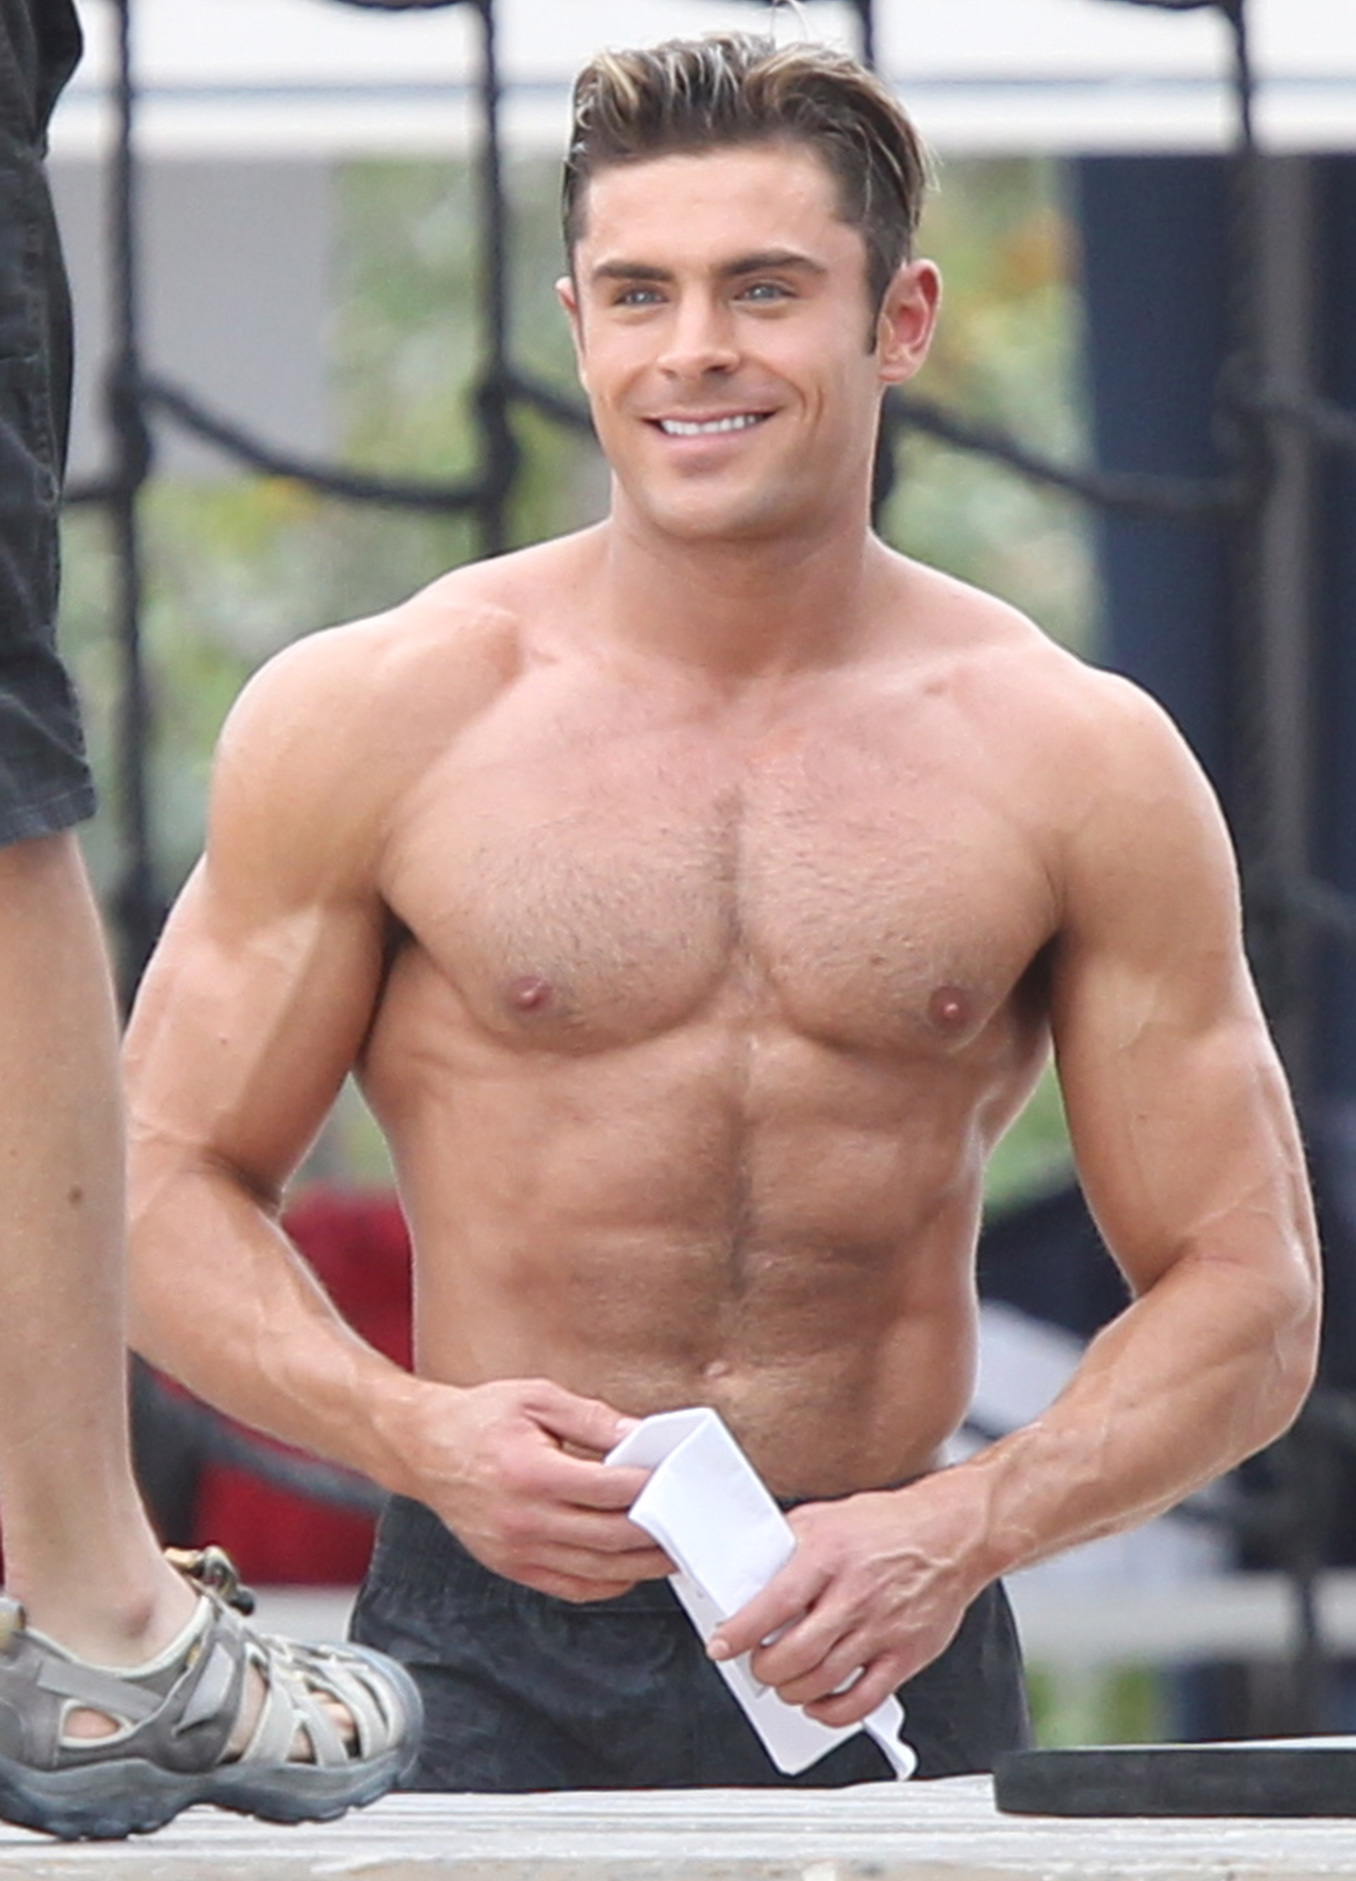 Shirtless Zac Efron Looks Super Buff Filming a Scene for Baywatch Pics Porn Pic Hd